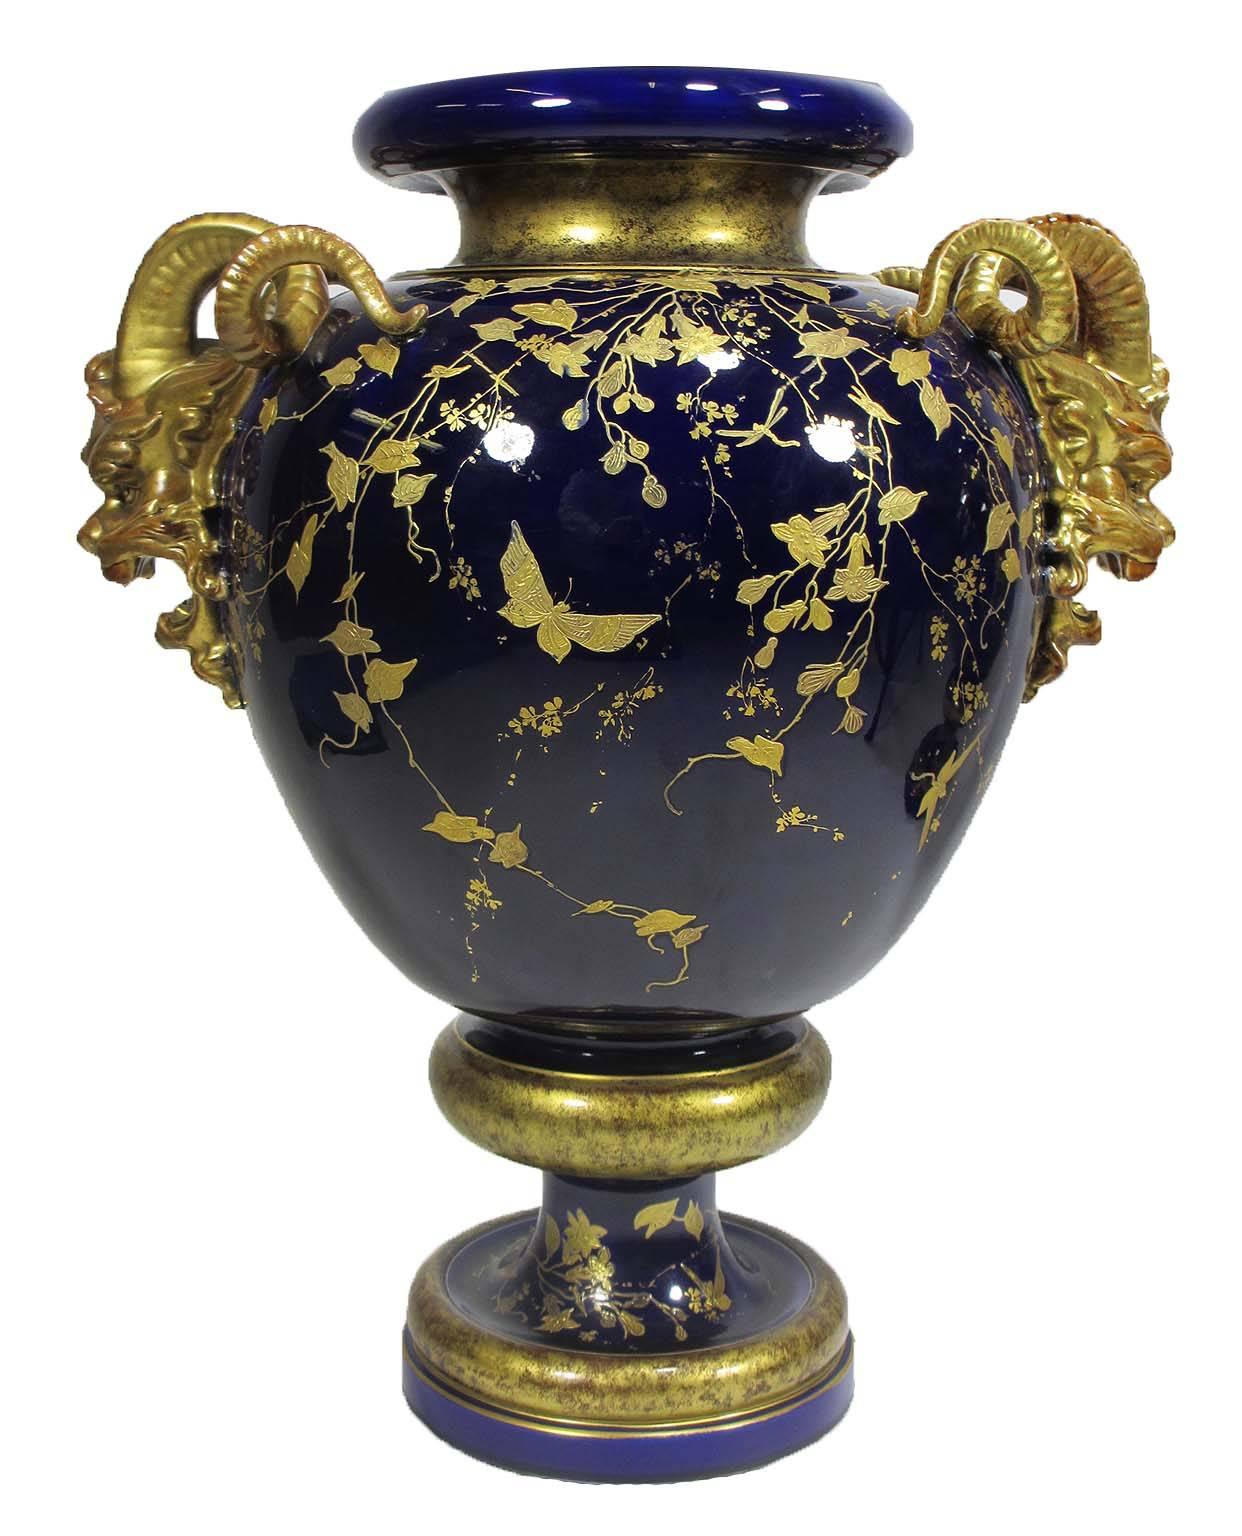 A very fine pair of 19th century cobalt-blue and parcel-gilt majolica figural vases, with figures of satyrs and gilt decorations of flowers and butterflies. Probably English, circa 1880.

Measures: Height: 24 1/2 inches (62.3 cm).
Width: 20 1/2